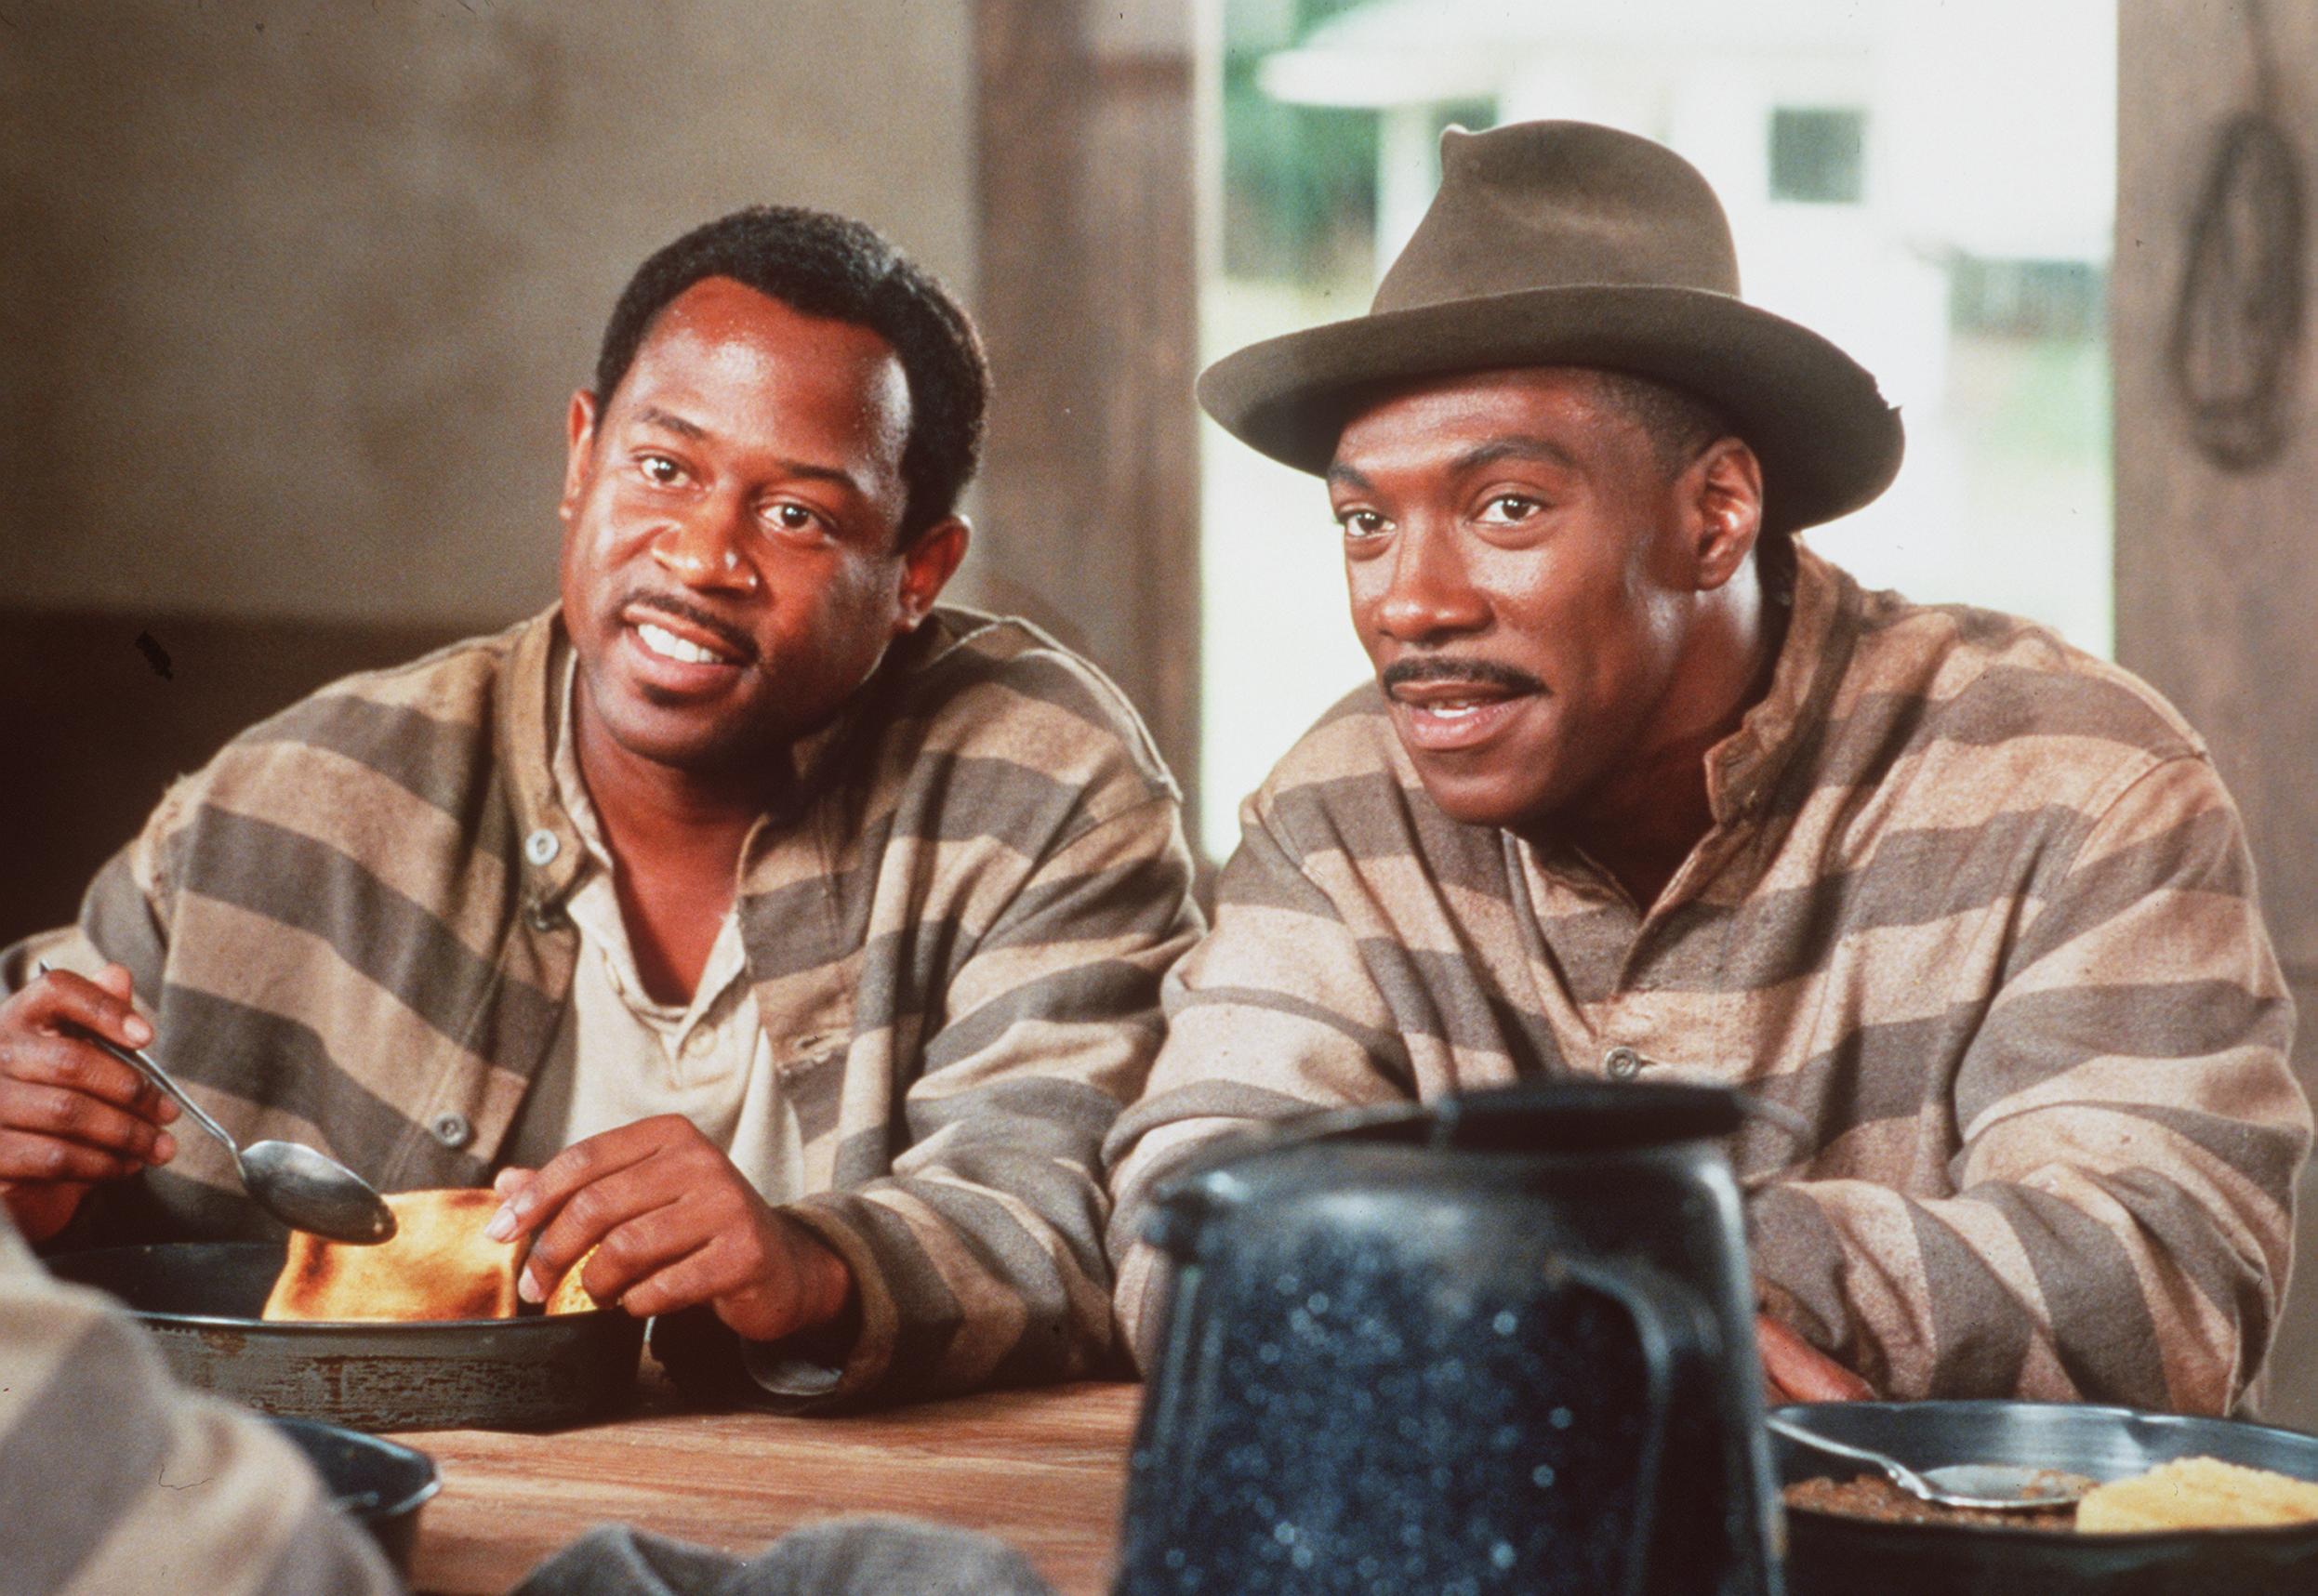 Martin Lawrence and Eddie Murphy acting in "Life" on May 18, 1999. | Source: Getty Images